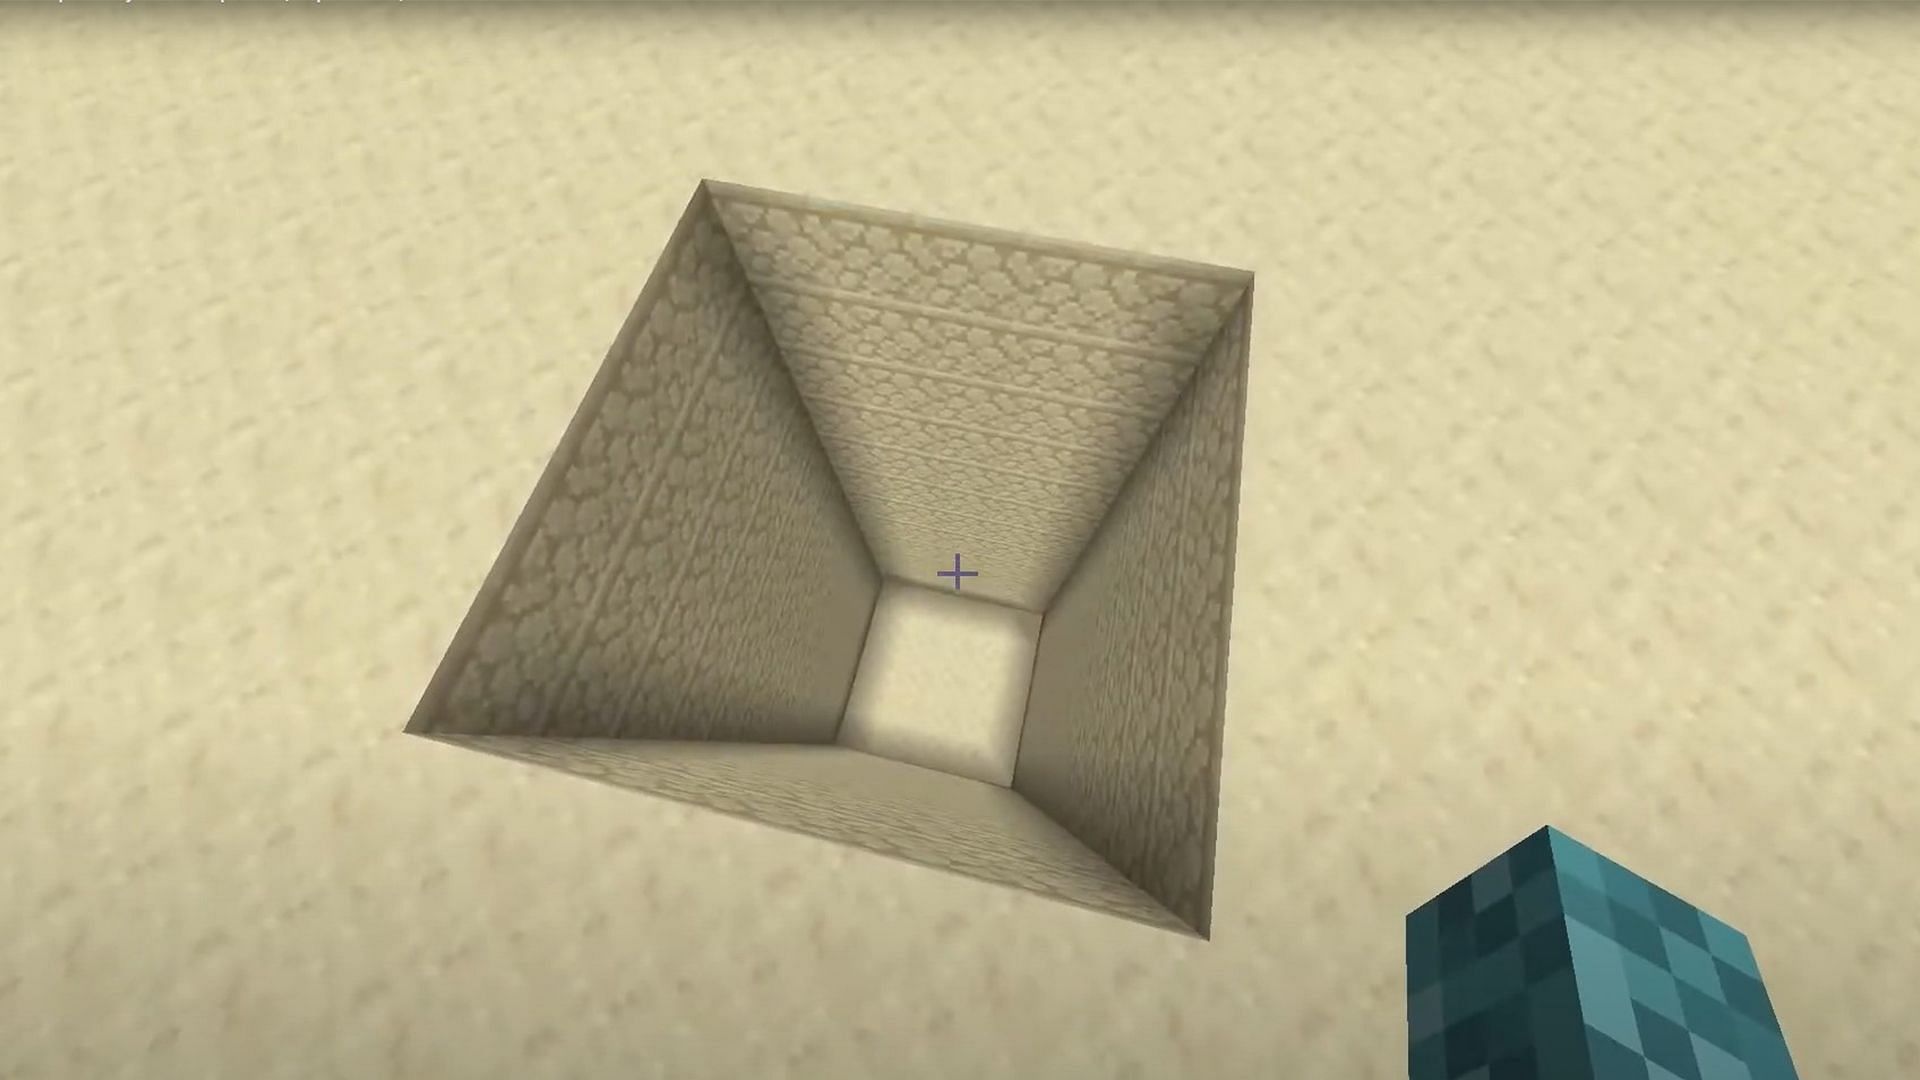 The first task is to dig a hole (Image via Mojang Studios)